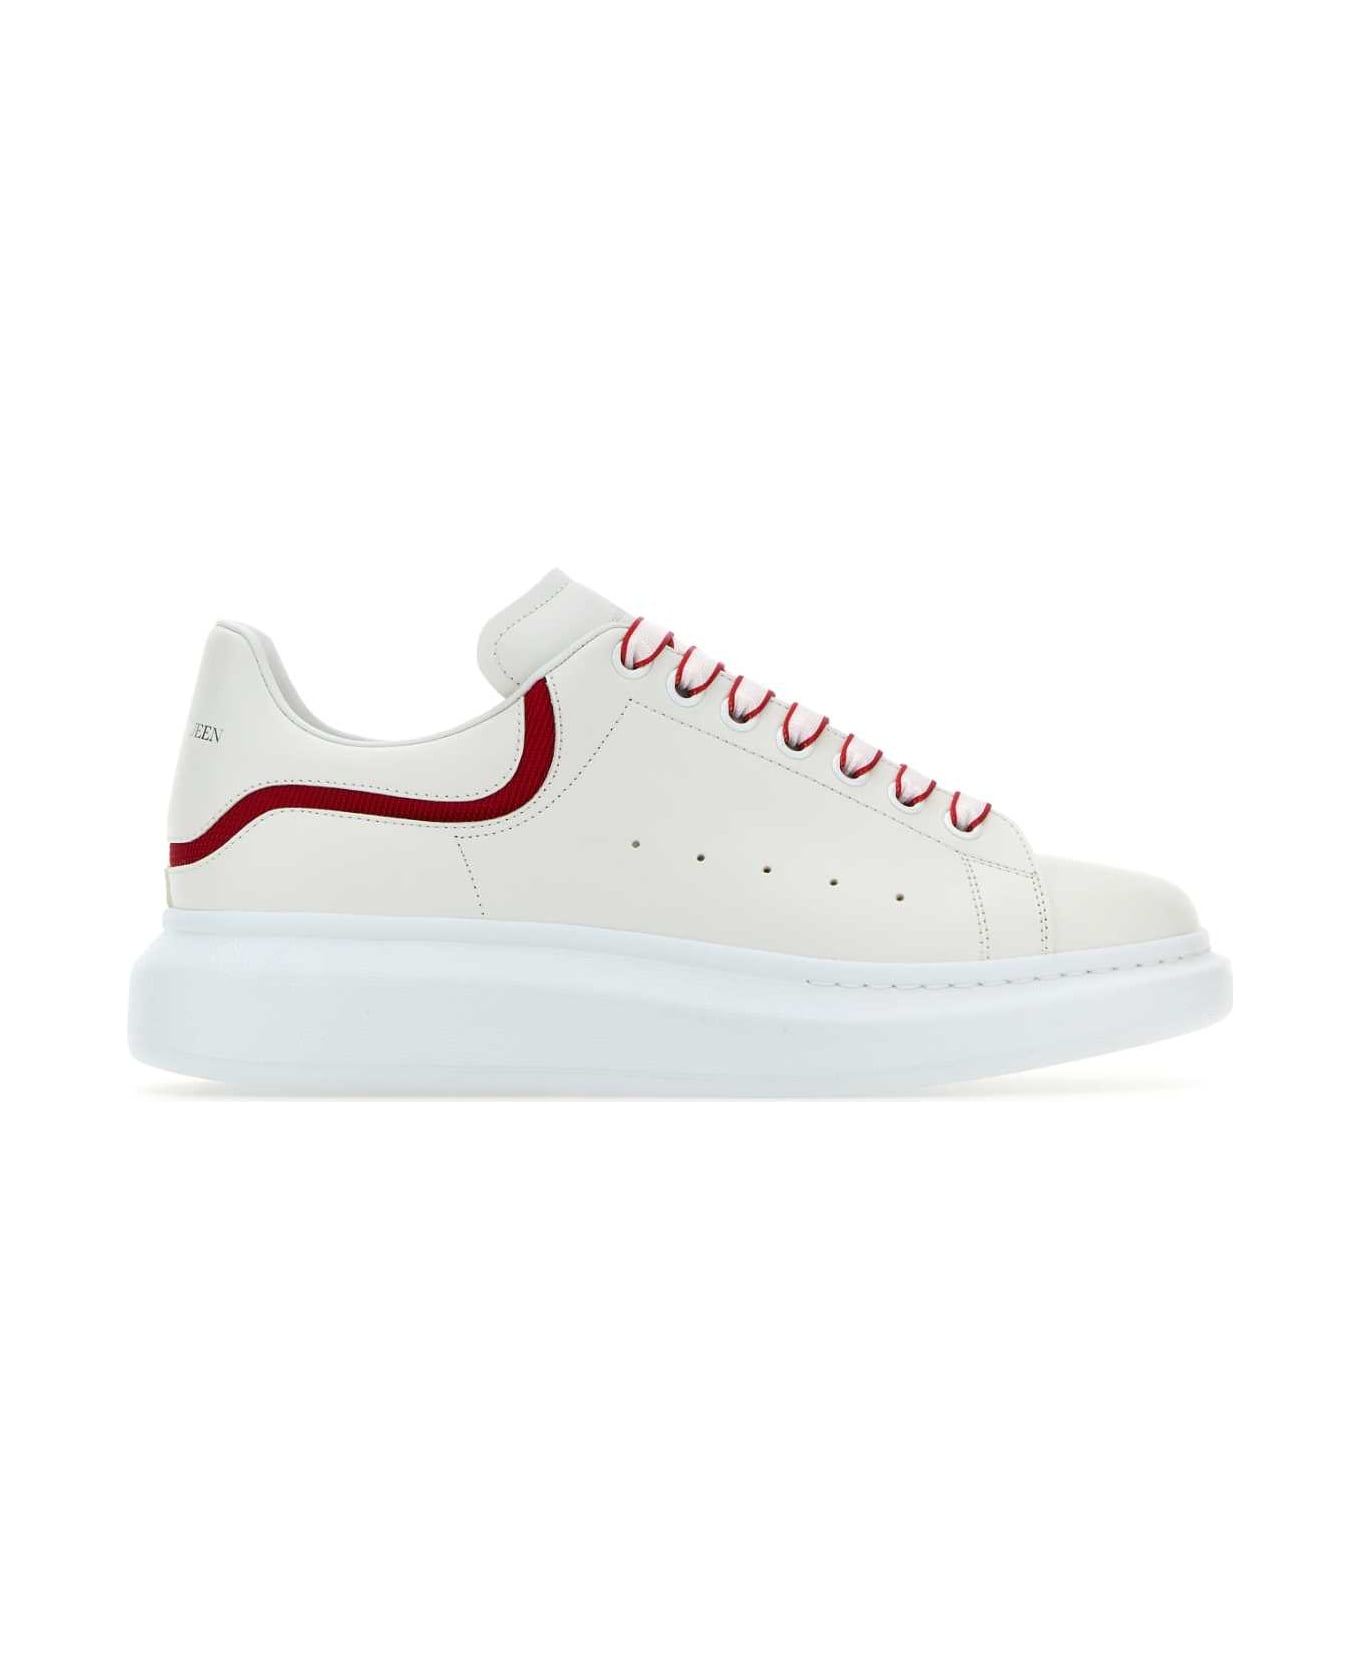 Alexander McQueen White Leather Sneakers With White Leather Heel - WHITERED